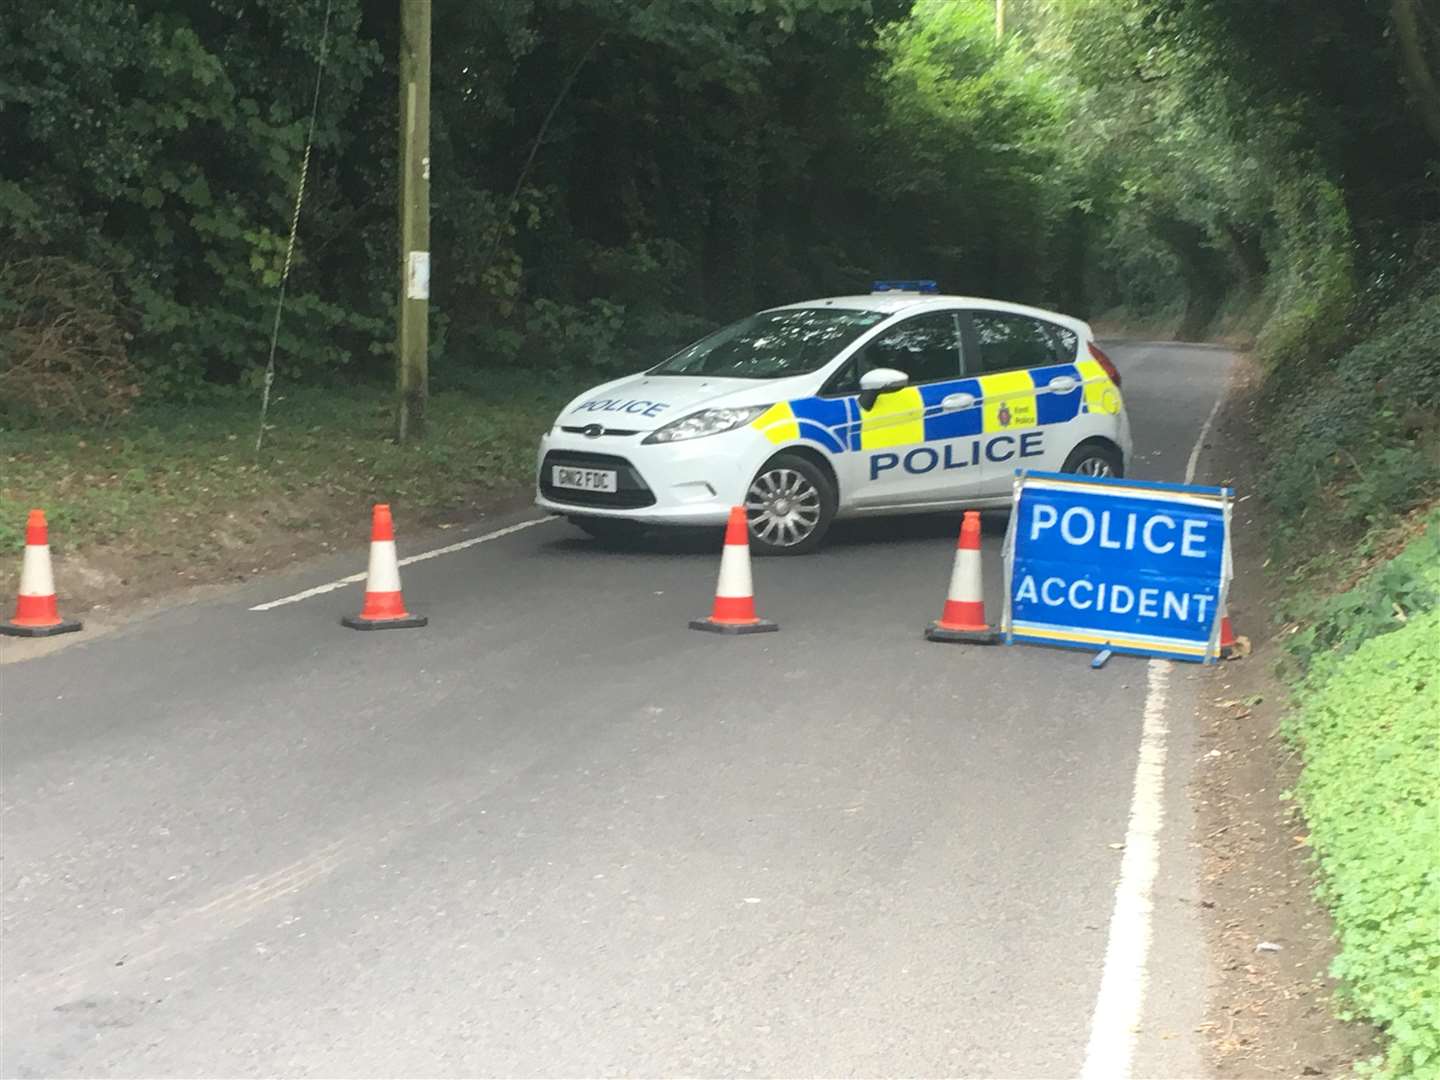 The scene of the crash remains cordoned off